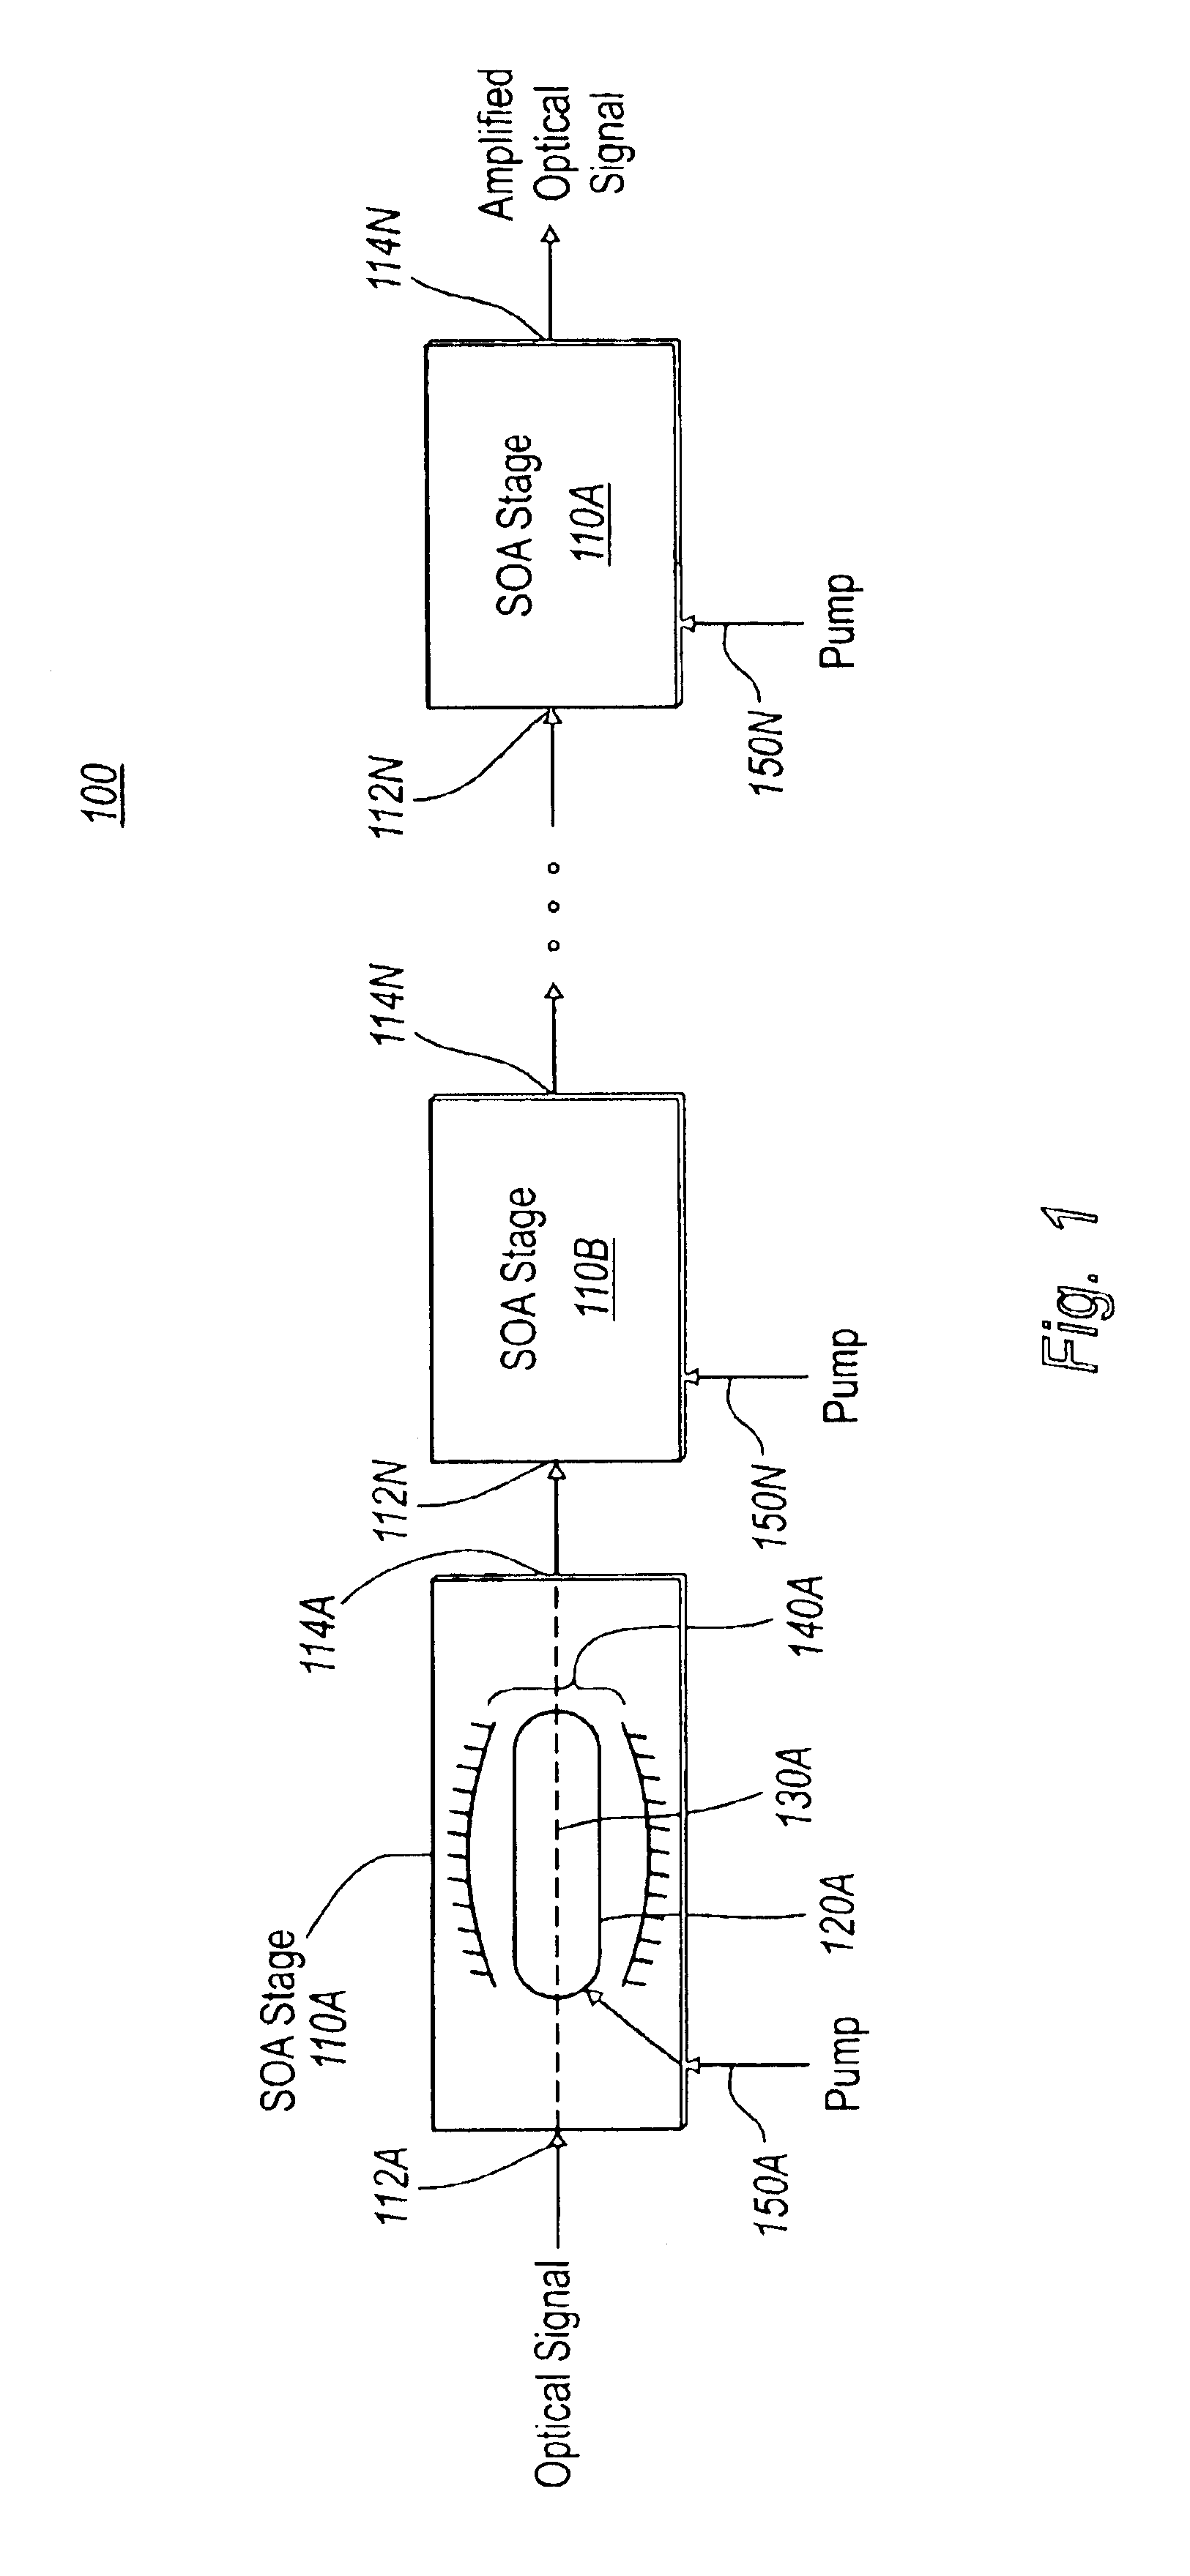 Multistage tunable gain optical amplifier